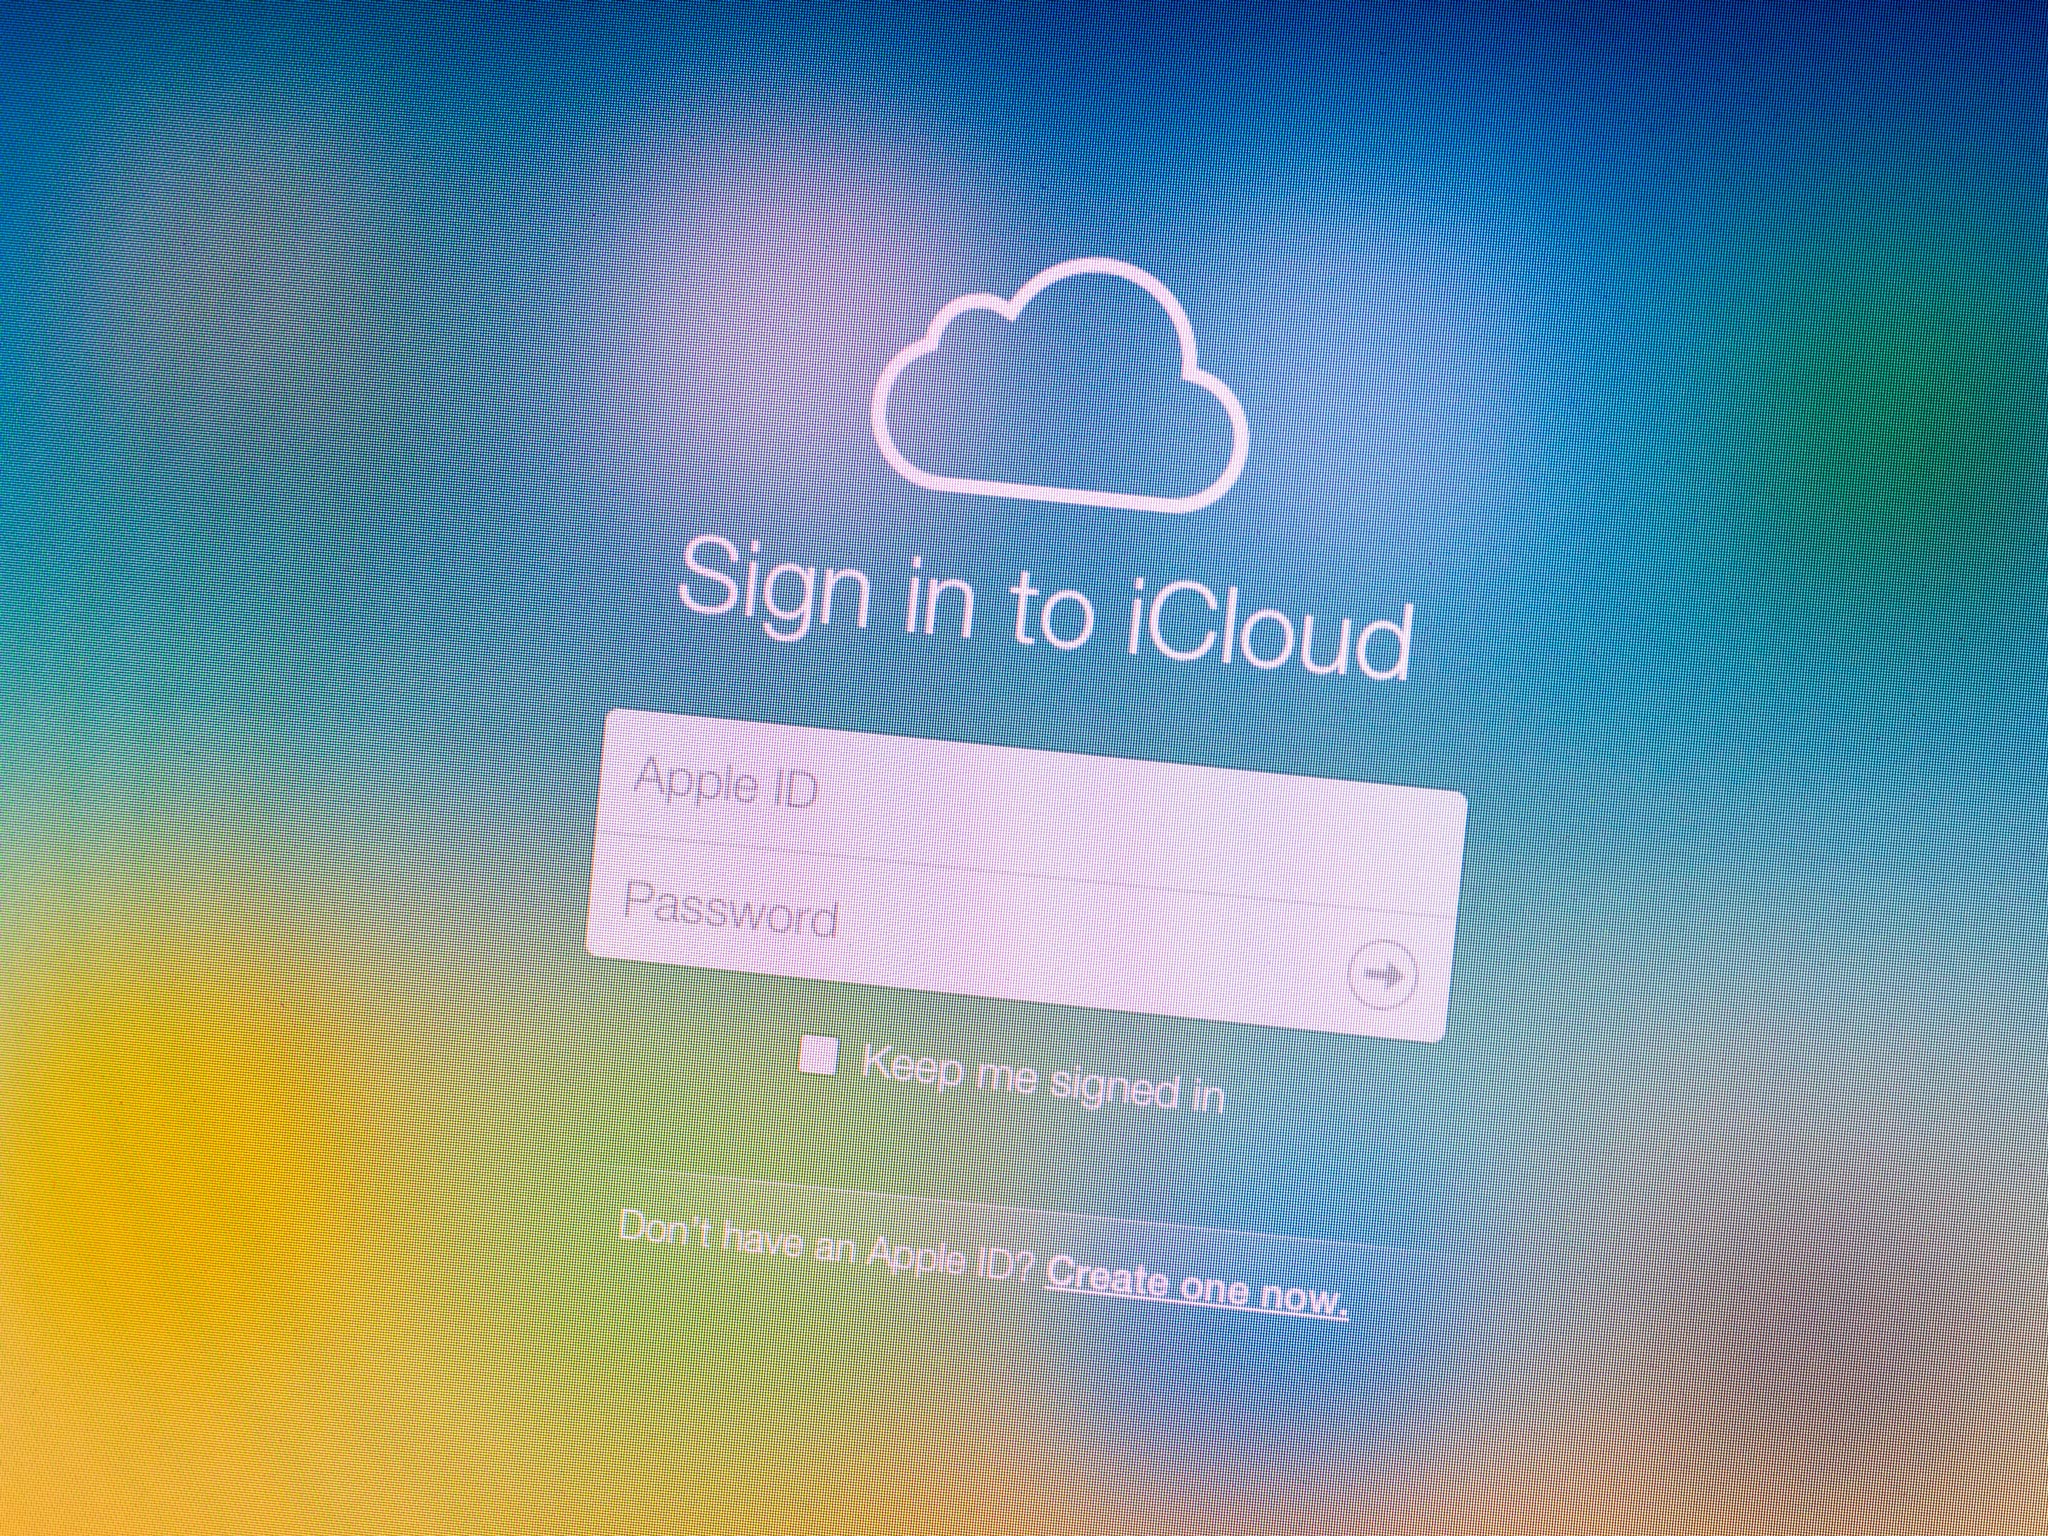 Google Cloud Platform to reportedly power portion of iCloud services 